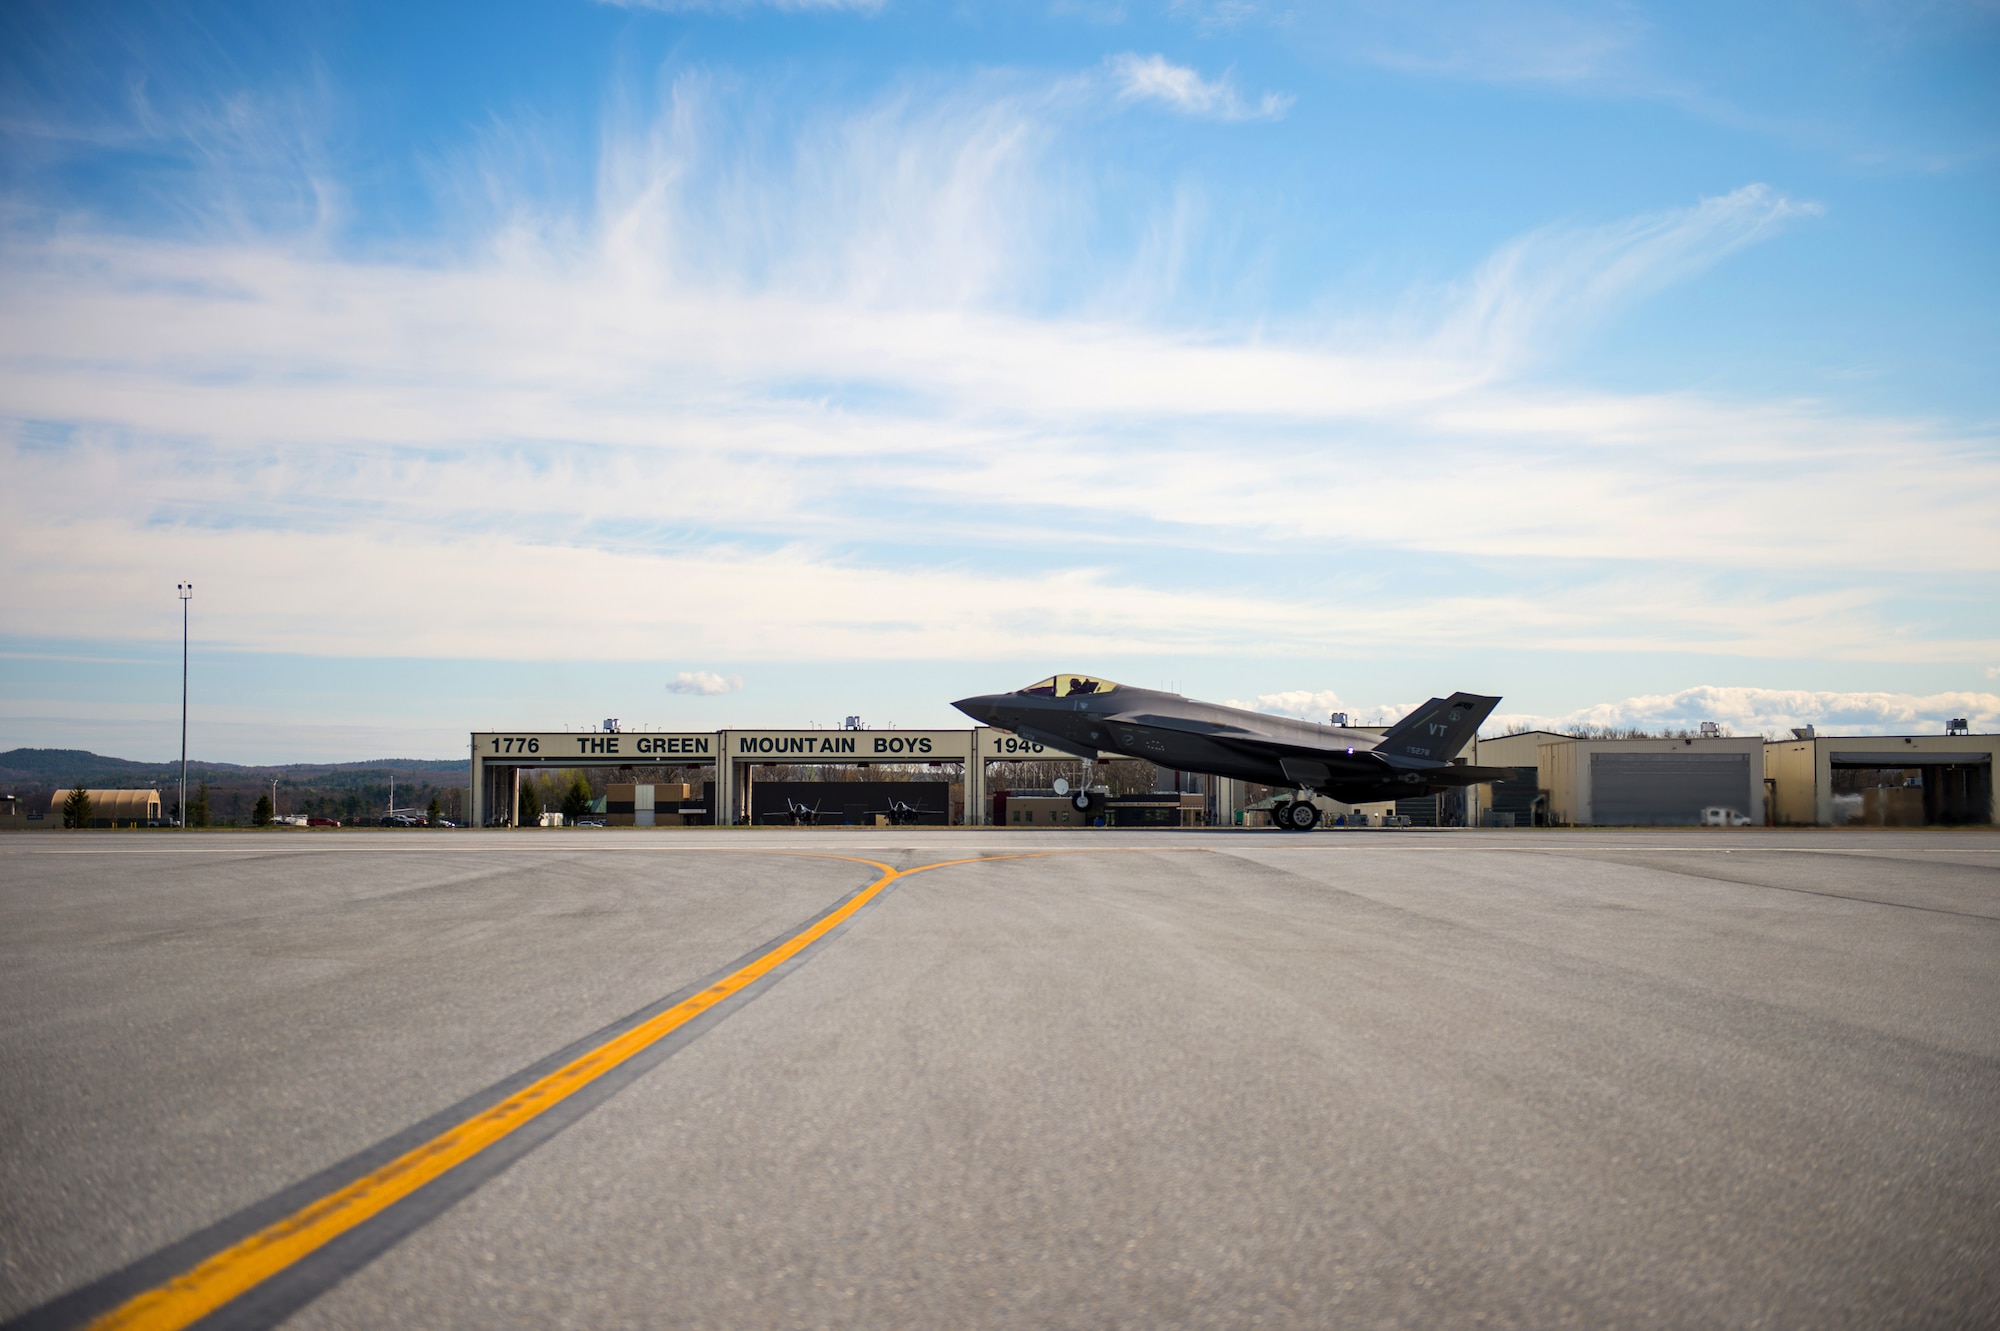 An F-35 Lightning II, Tail 5278, takes flight from the Vermont Air National Guard Base.